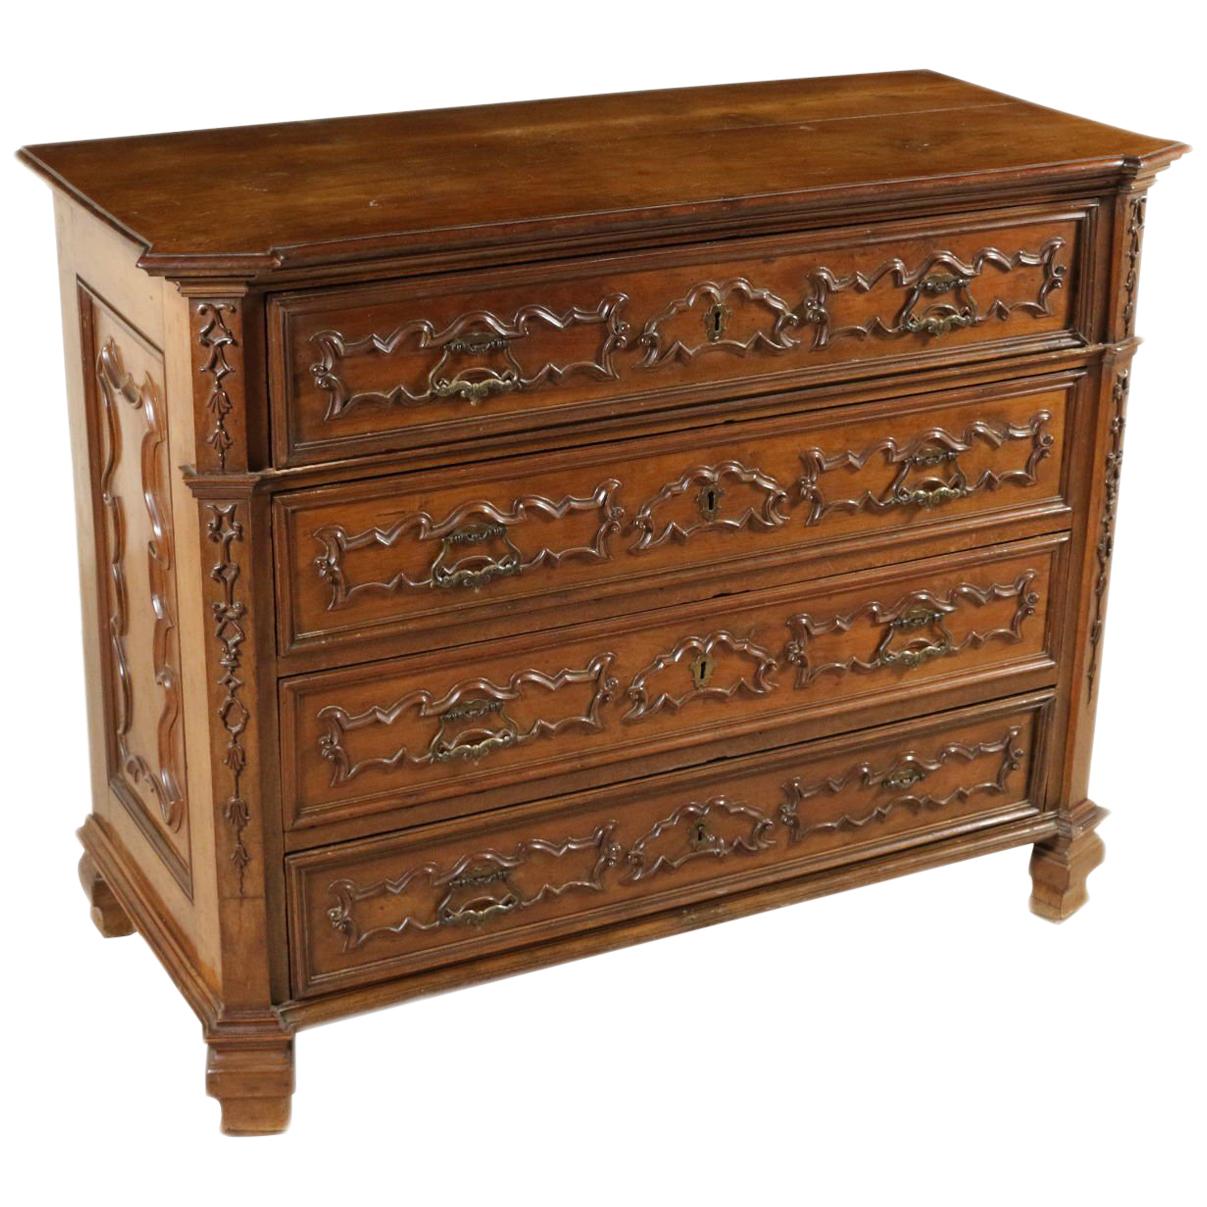 Chest of Drawers Walnut Manufactured in Northern Italy, Early 1700